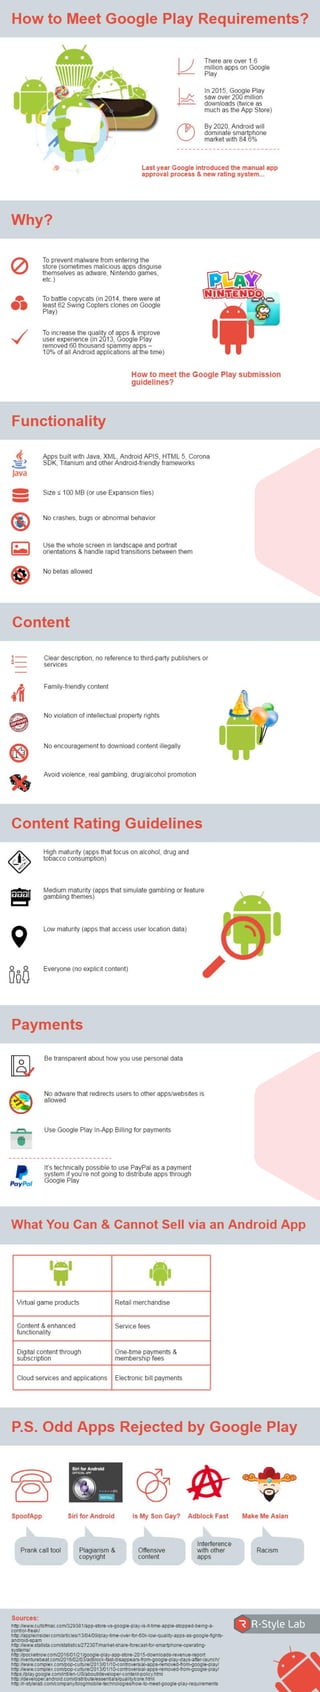 How to Meet Google Play Requirements?